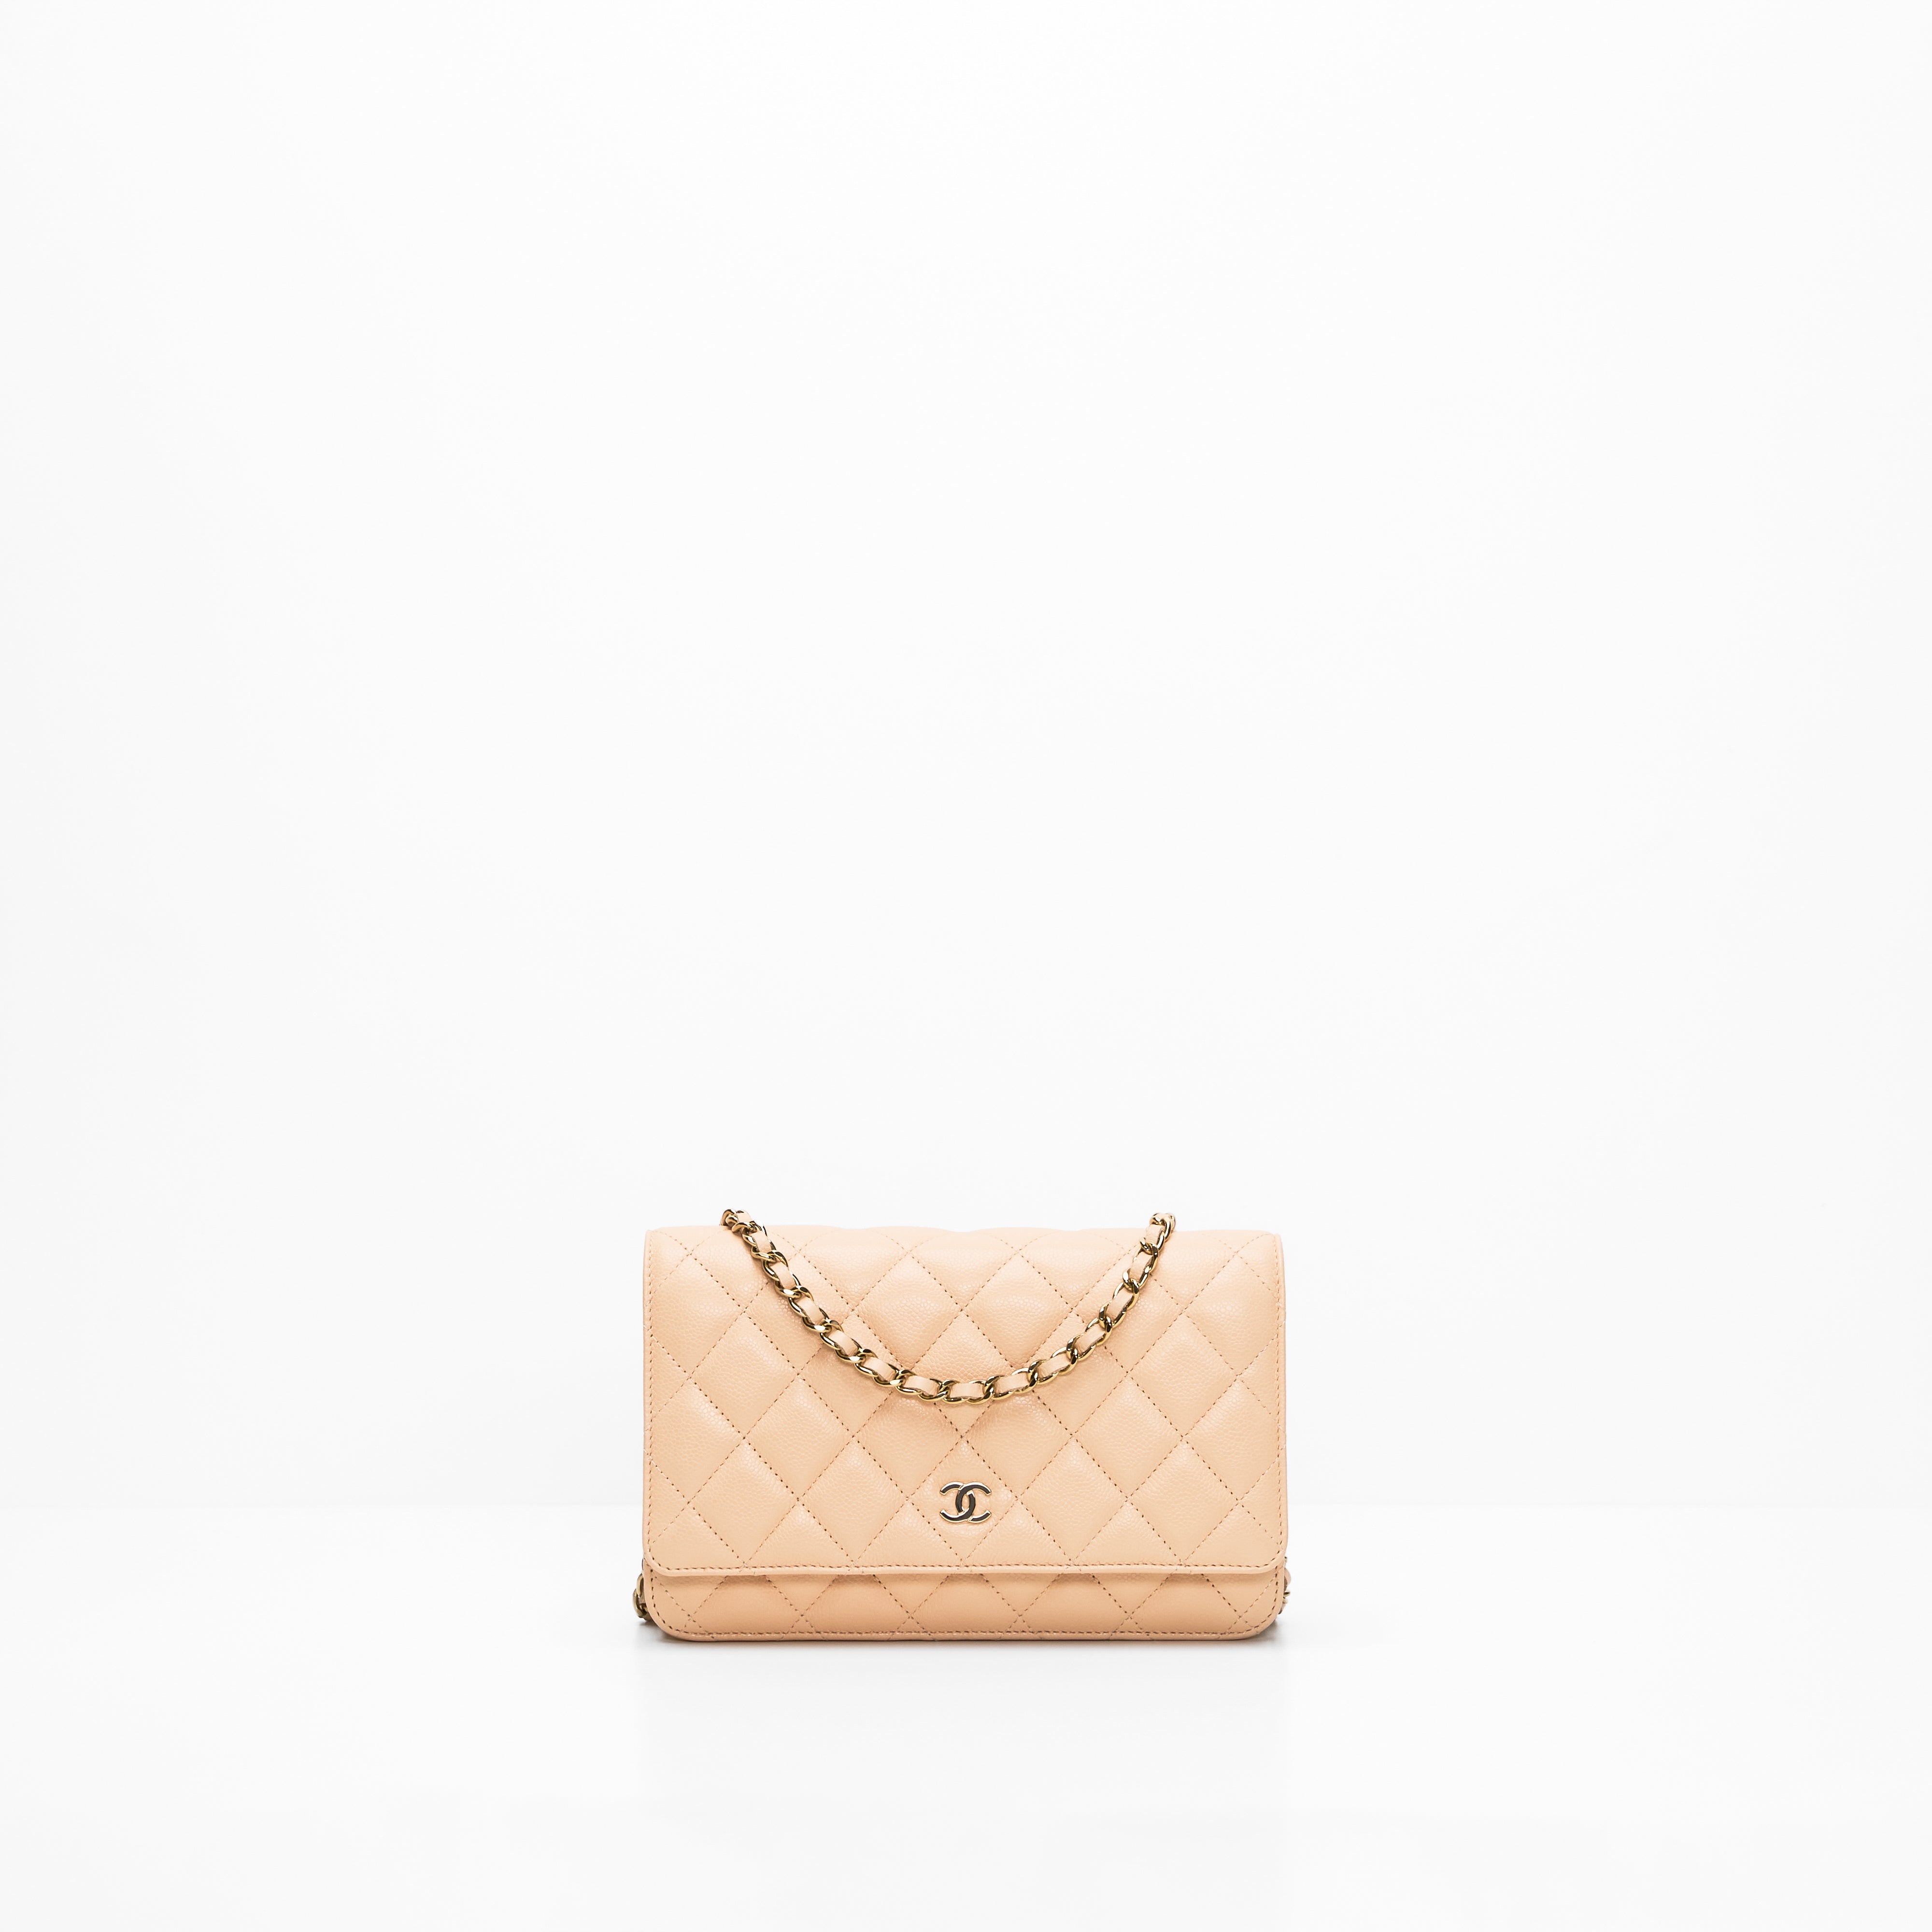 Chanel Woc Sling Bag in Pink